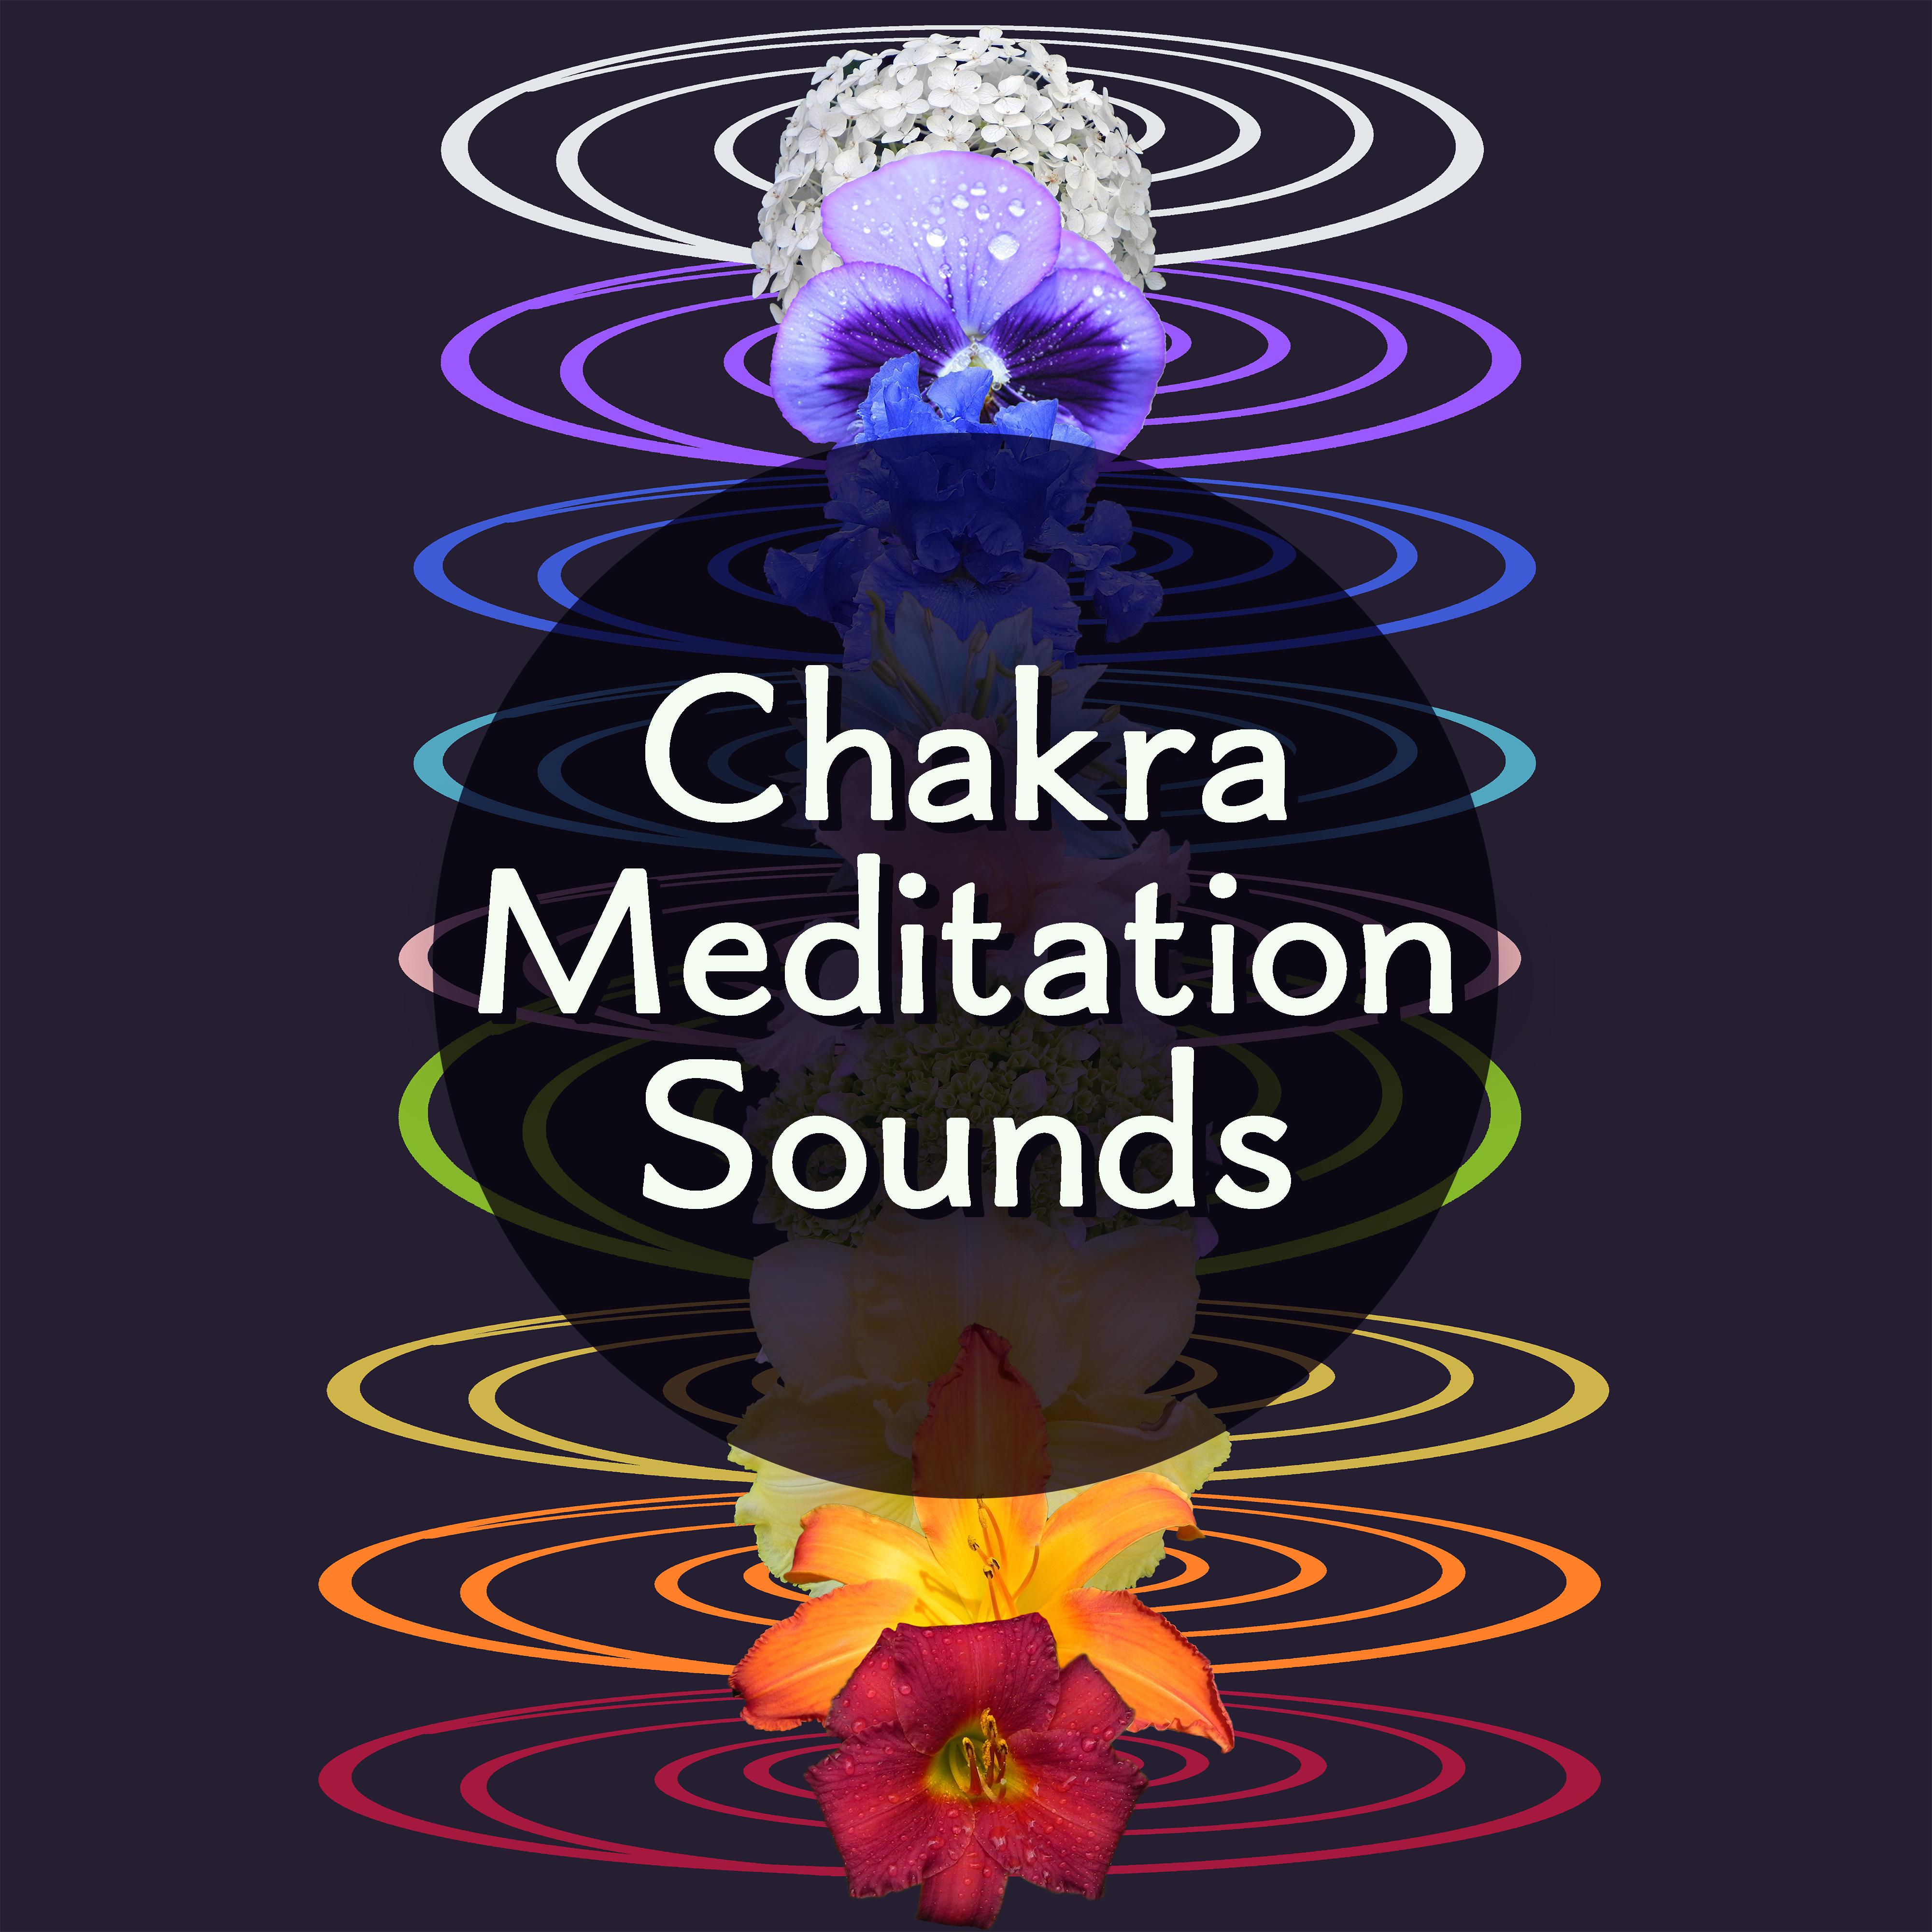 Chakra Meditation Sounds  Meditate  Relax, Rest with New Age Music, Chilled Songs, Buddha Lounge